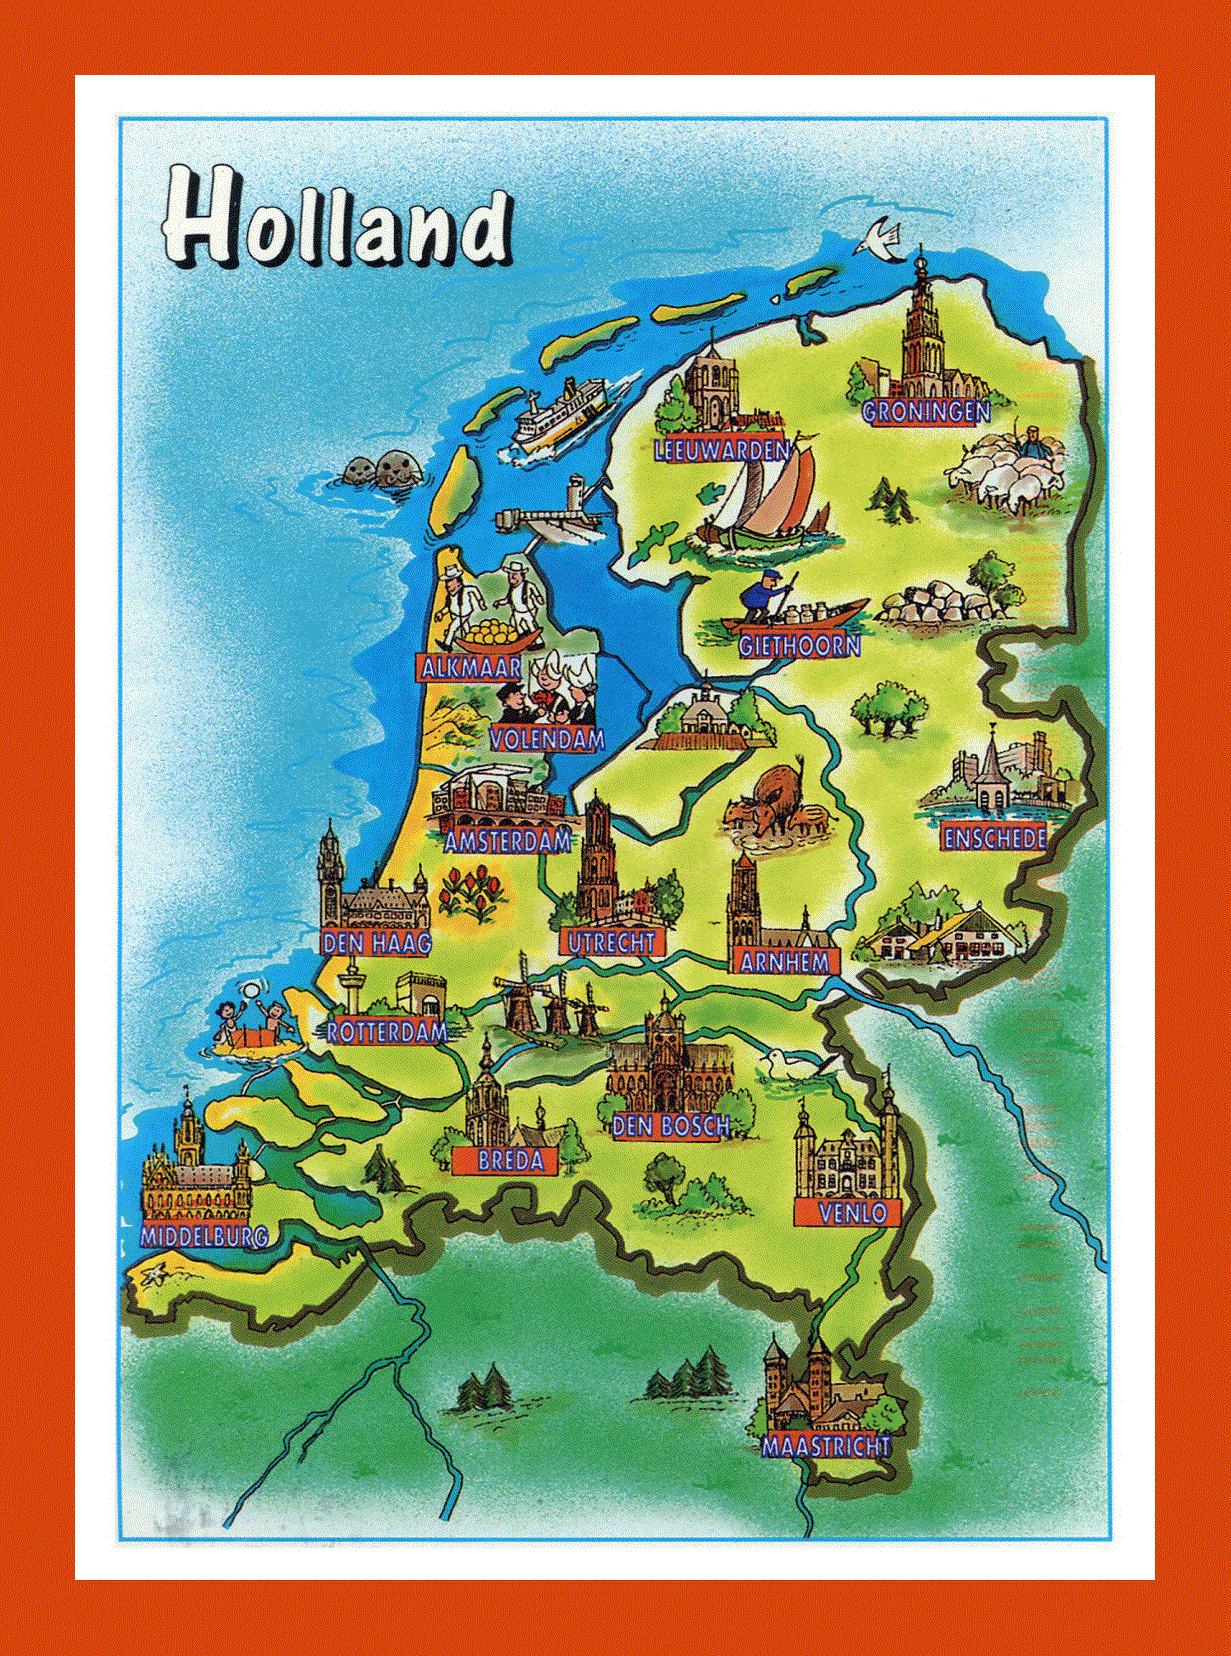 Tourist illustrated map of Netherlands (Holland)